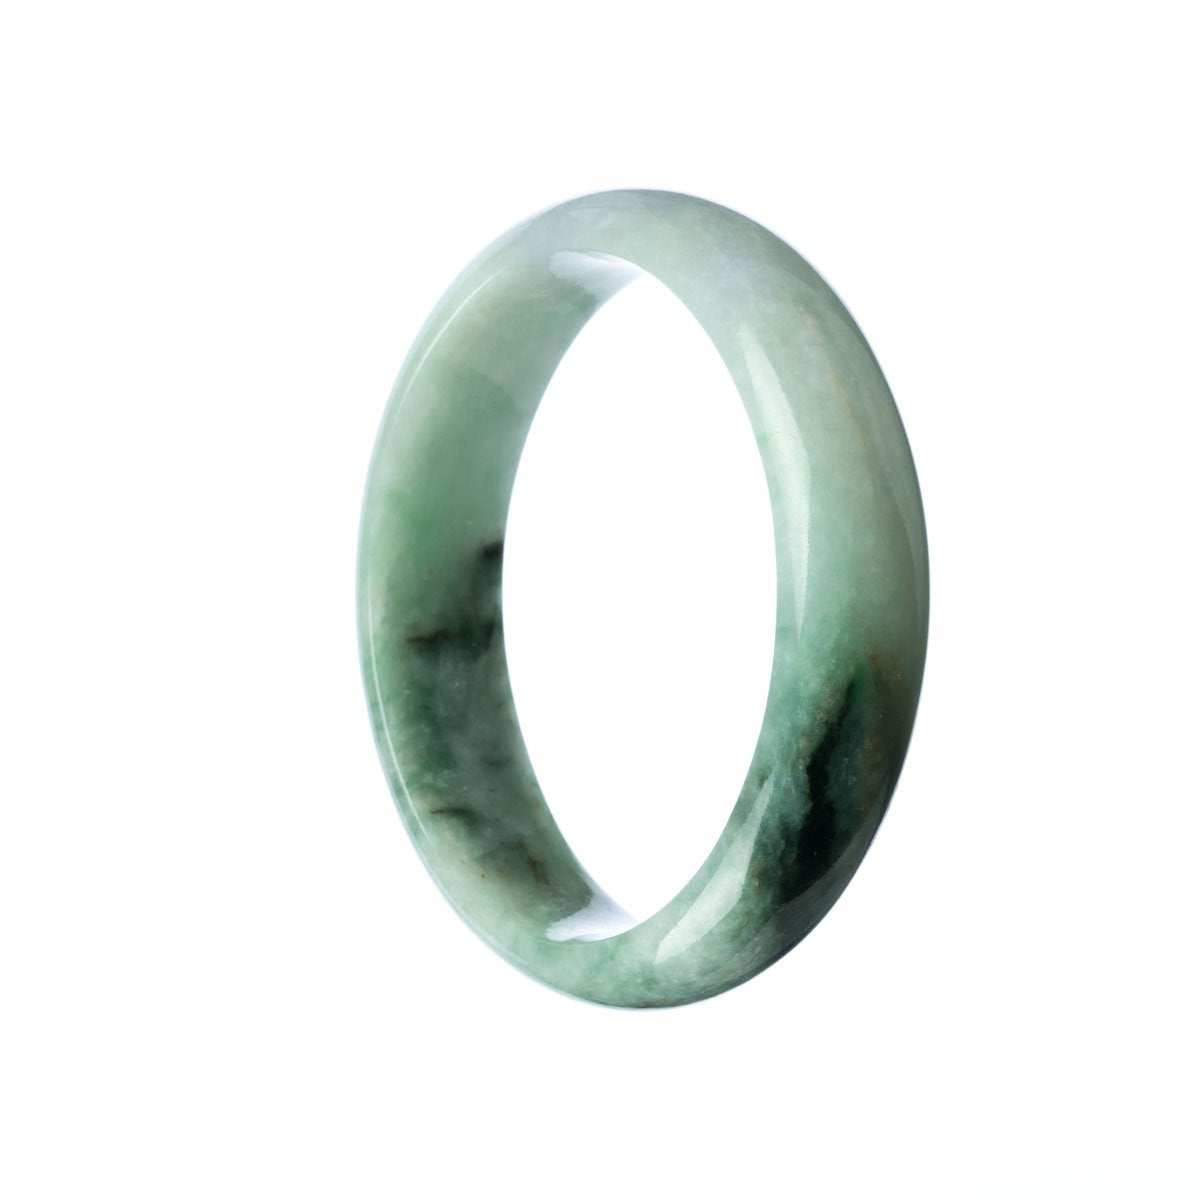 A close-up image of an oval-shaped, Grade A Green Burma Jade bracelet. The bracelet is crafted with authentic jade stones, known for their vibrant green color and natural beauty. It measures 59mm in size, making it a stunning piece of jewelry to add to your collection. The brand, MAYS, is displayed as well.